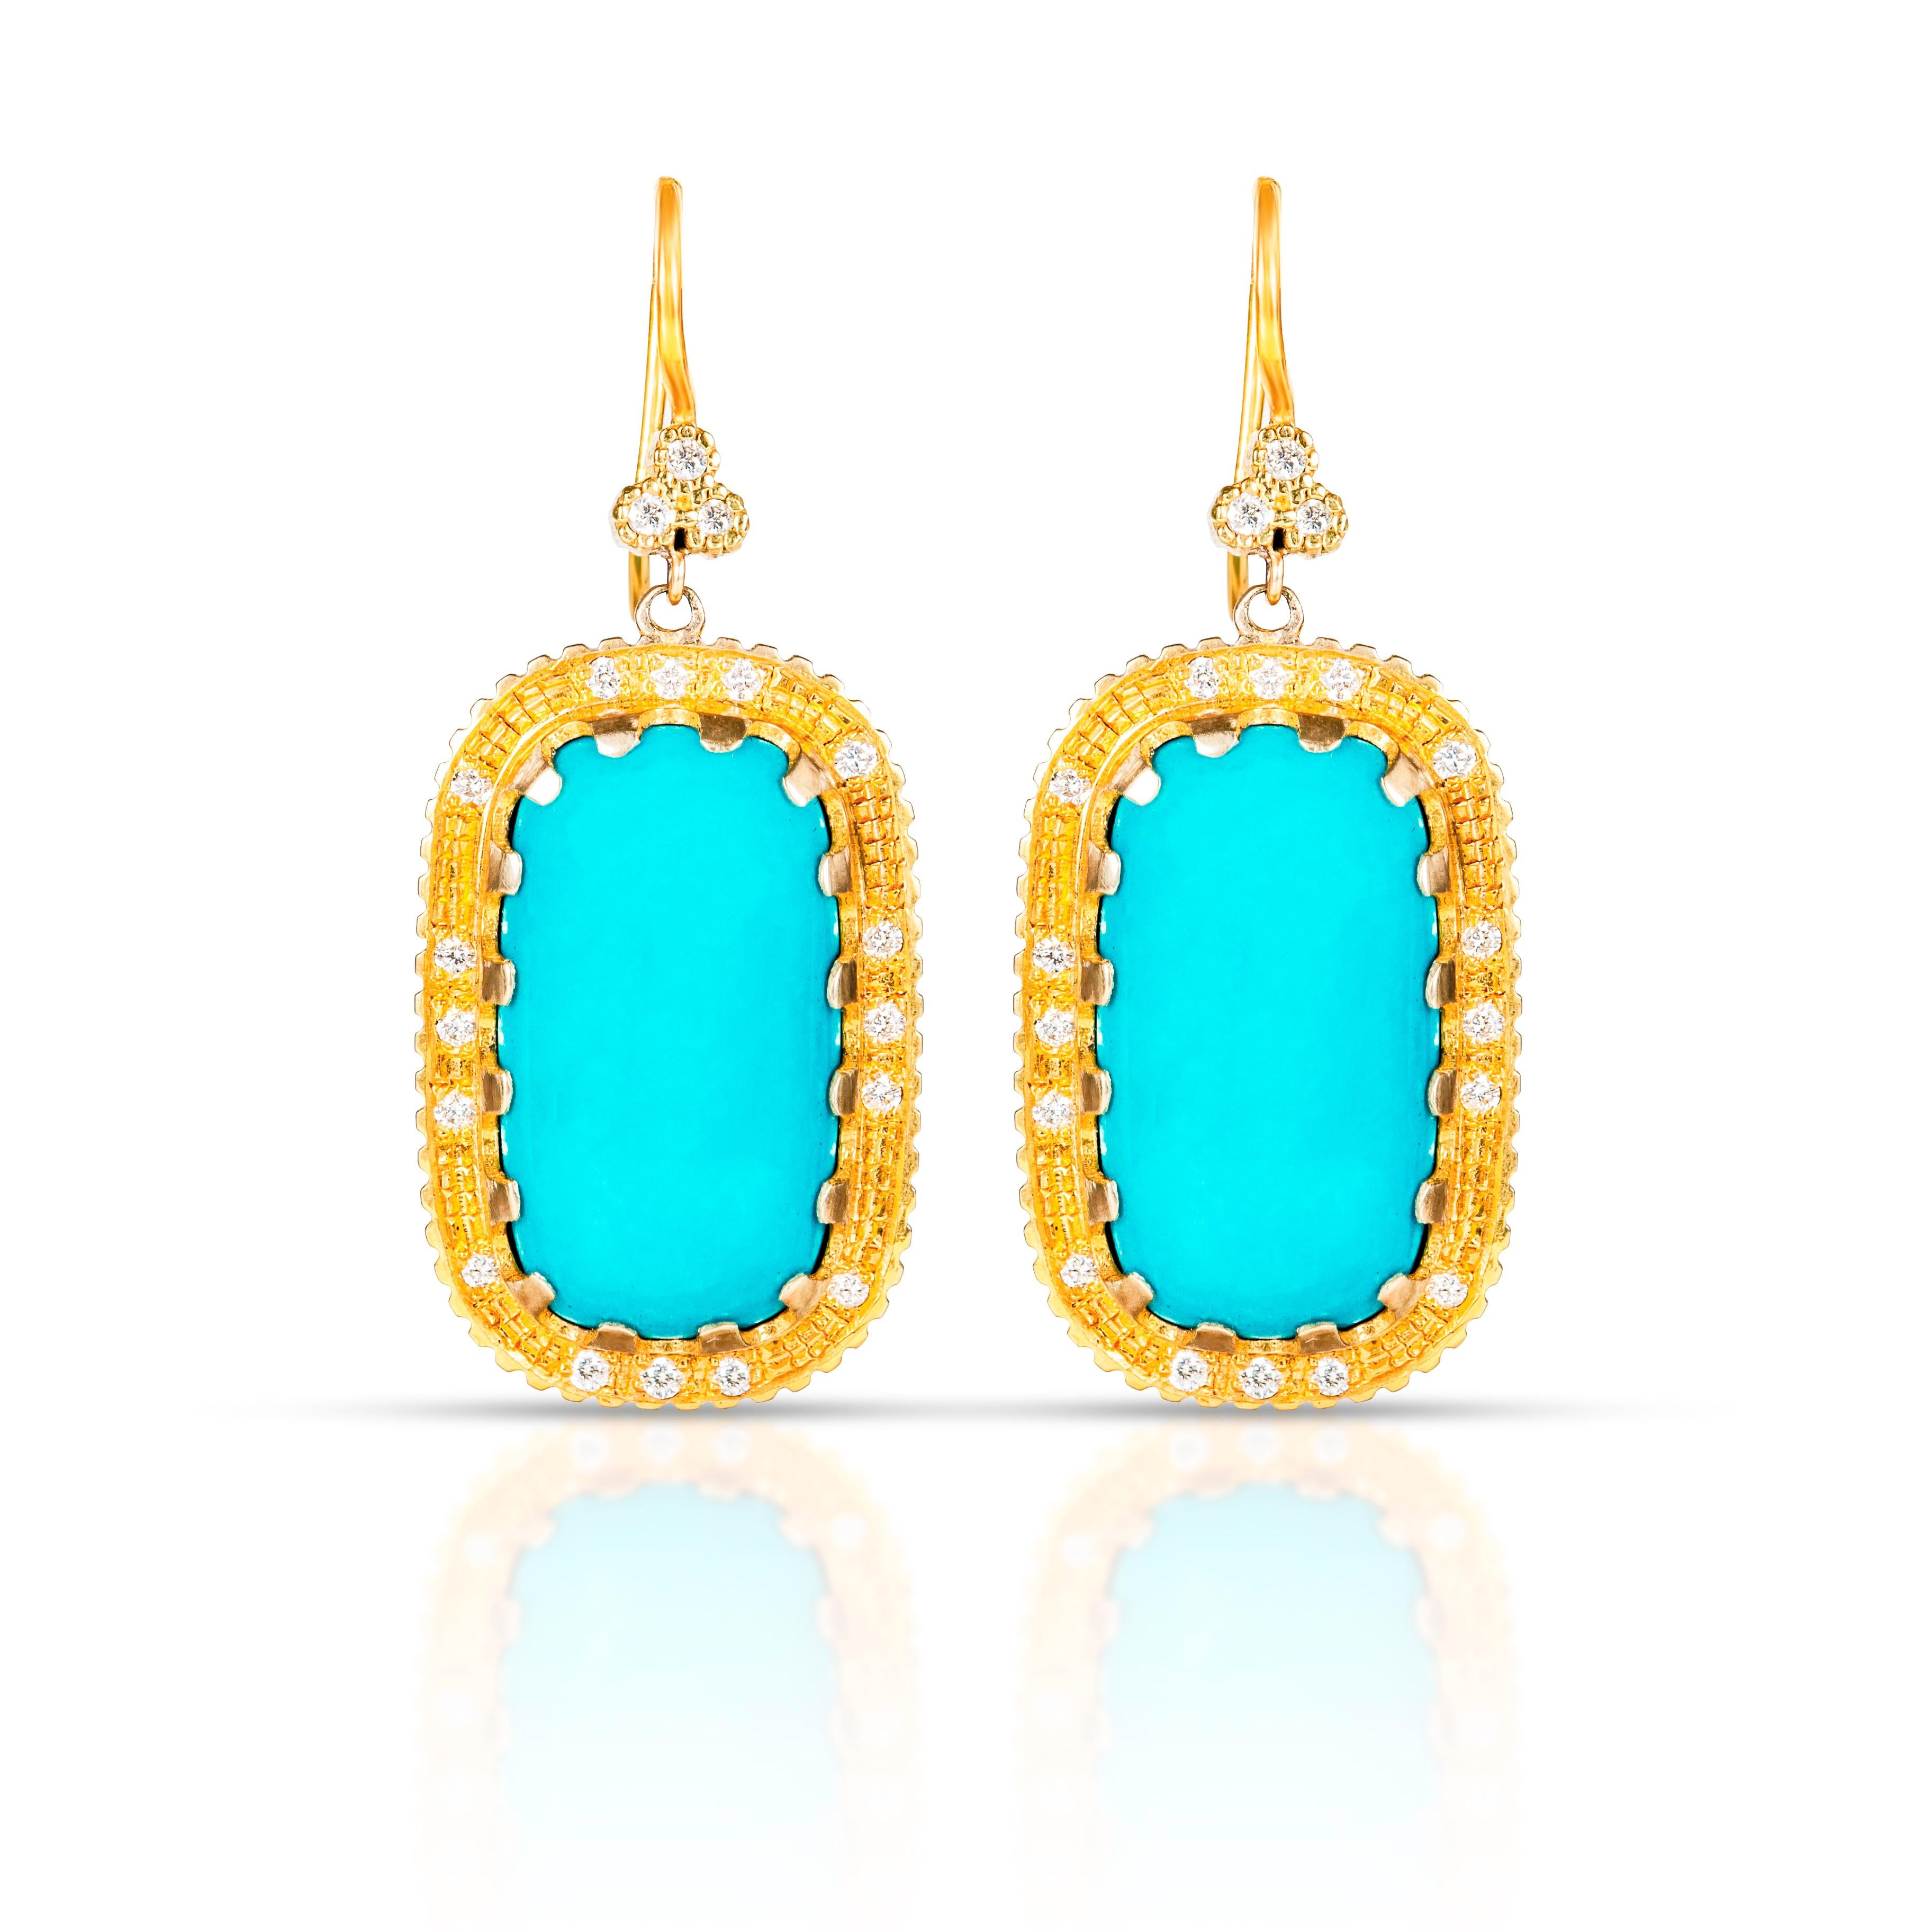 Cabochon 10 Karat Yellow Gold and Turquoise Diamond Earring Suneera For Sale